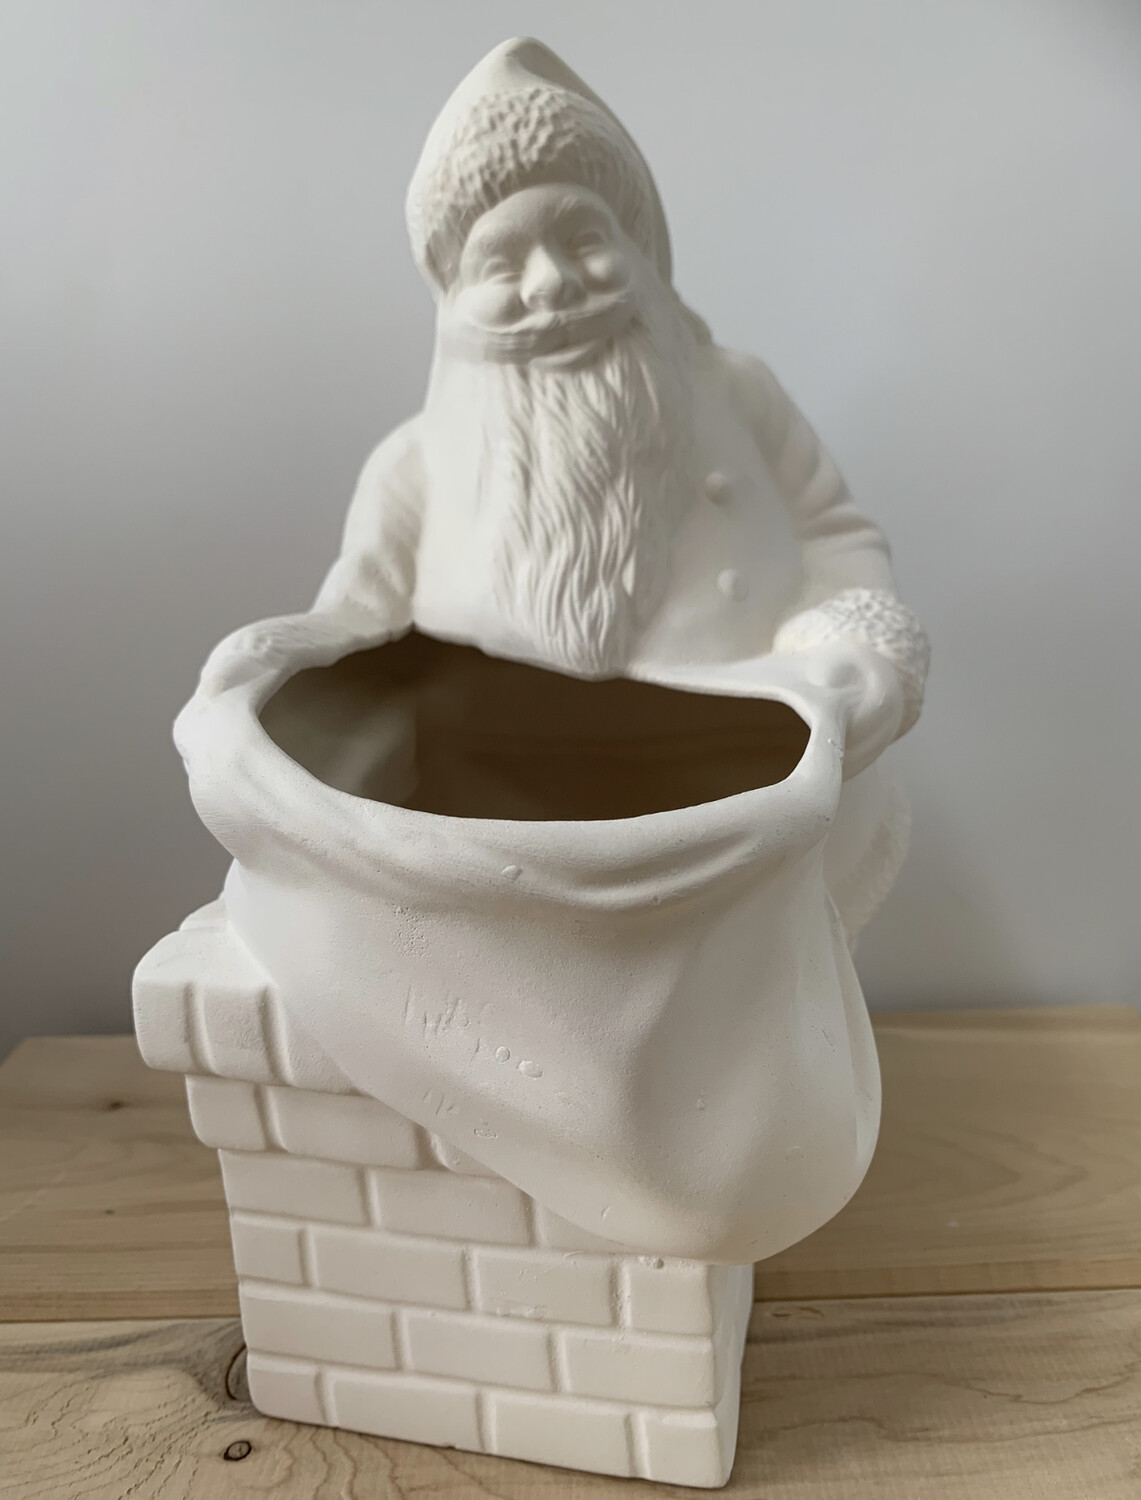 NO FIRE Paint Your Own Pottery Kit - 
Ceramic Santa and Chimney Figurine Acrylic Painting Kit